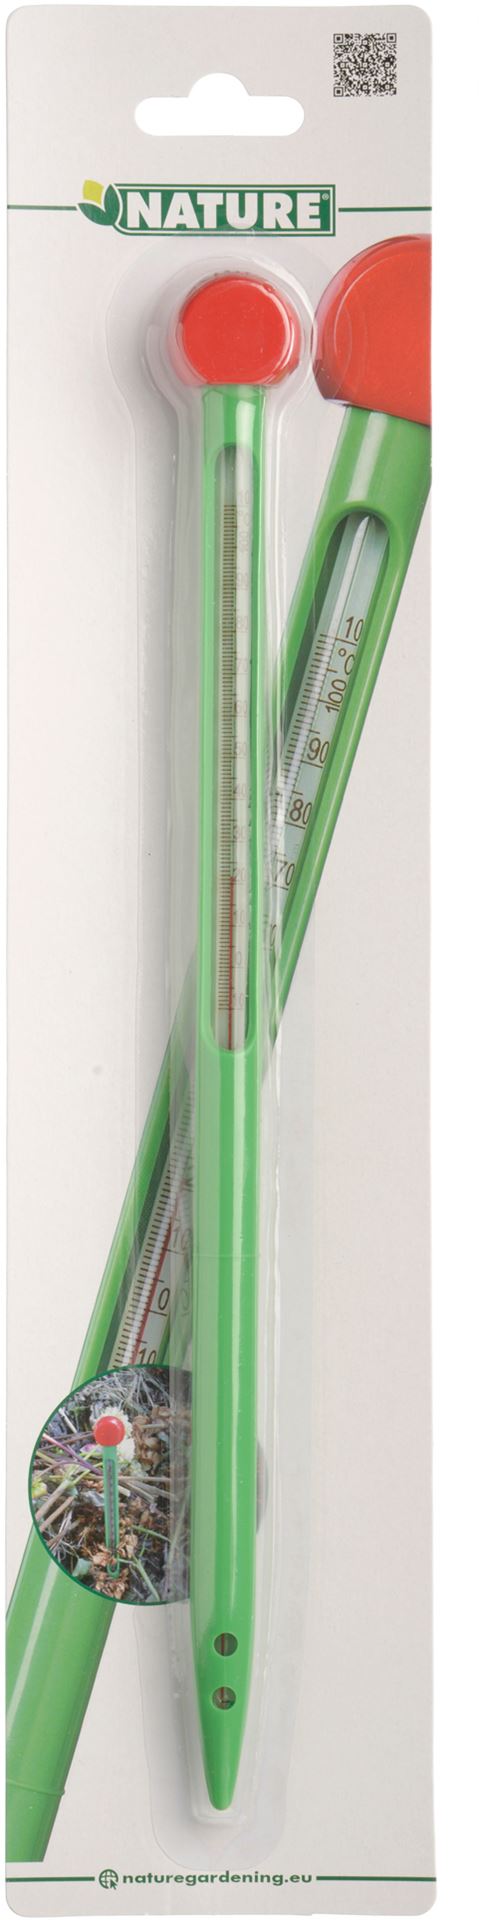 Compost-thermometer-32cm